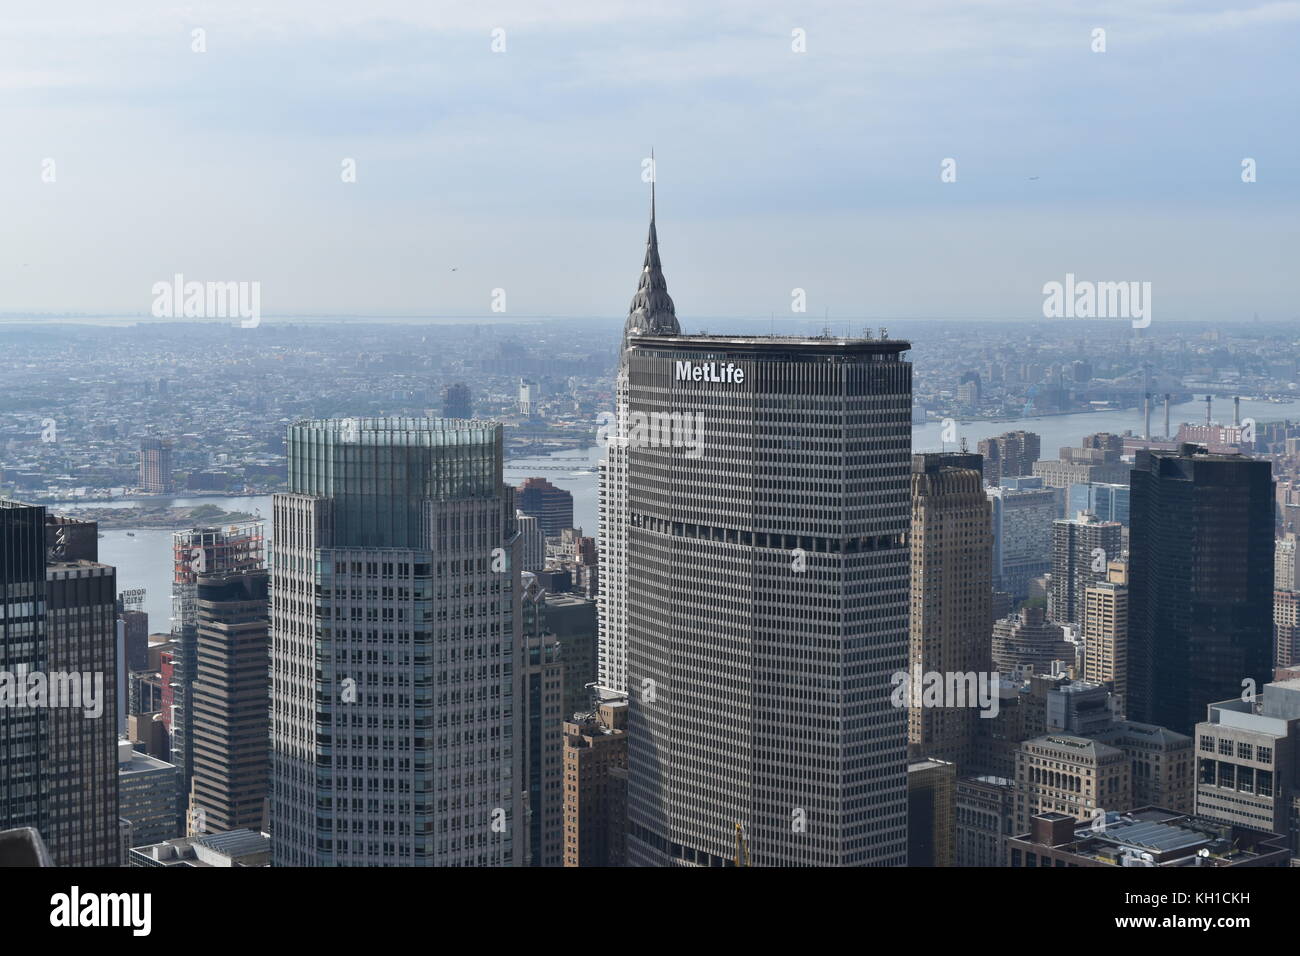 383 Madison Avenue, MetLife Building and the Chrysler Building, taken from the Top Of The Rock Observatory. New York City. Stock Photo